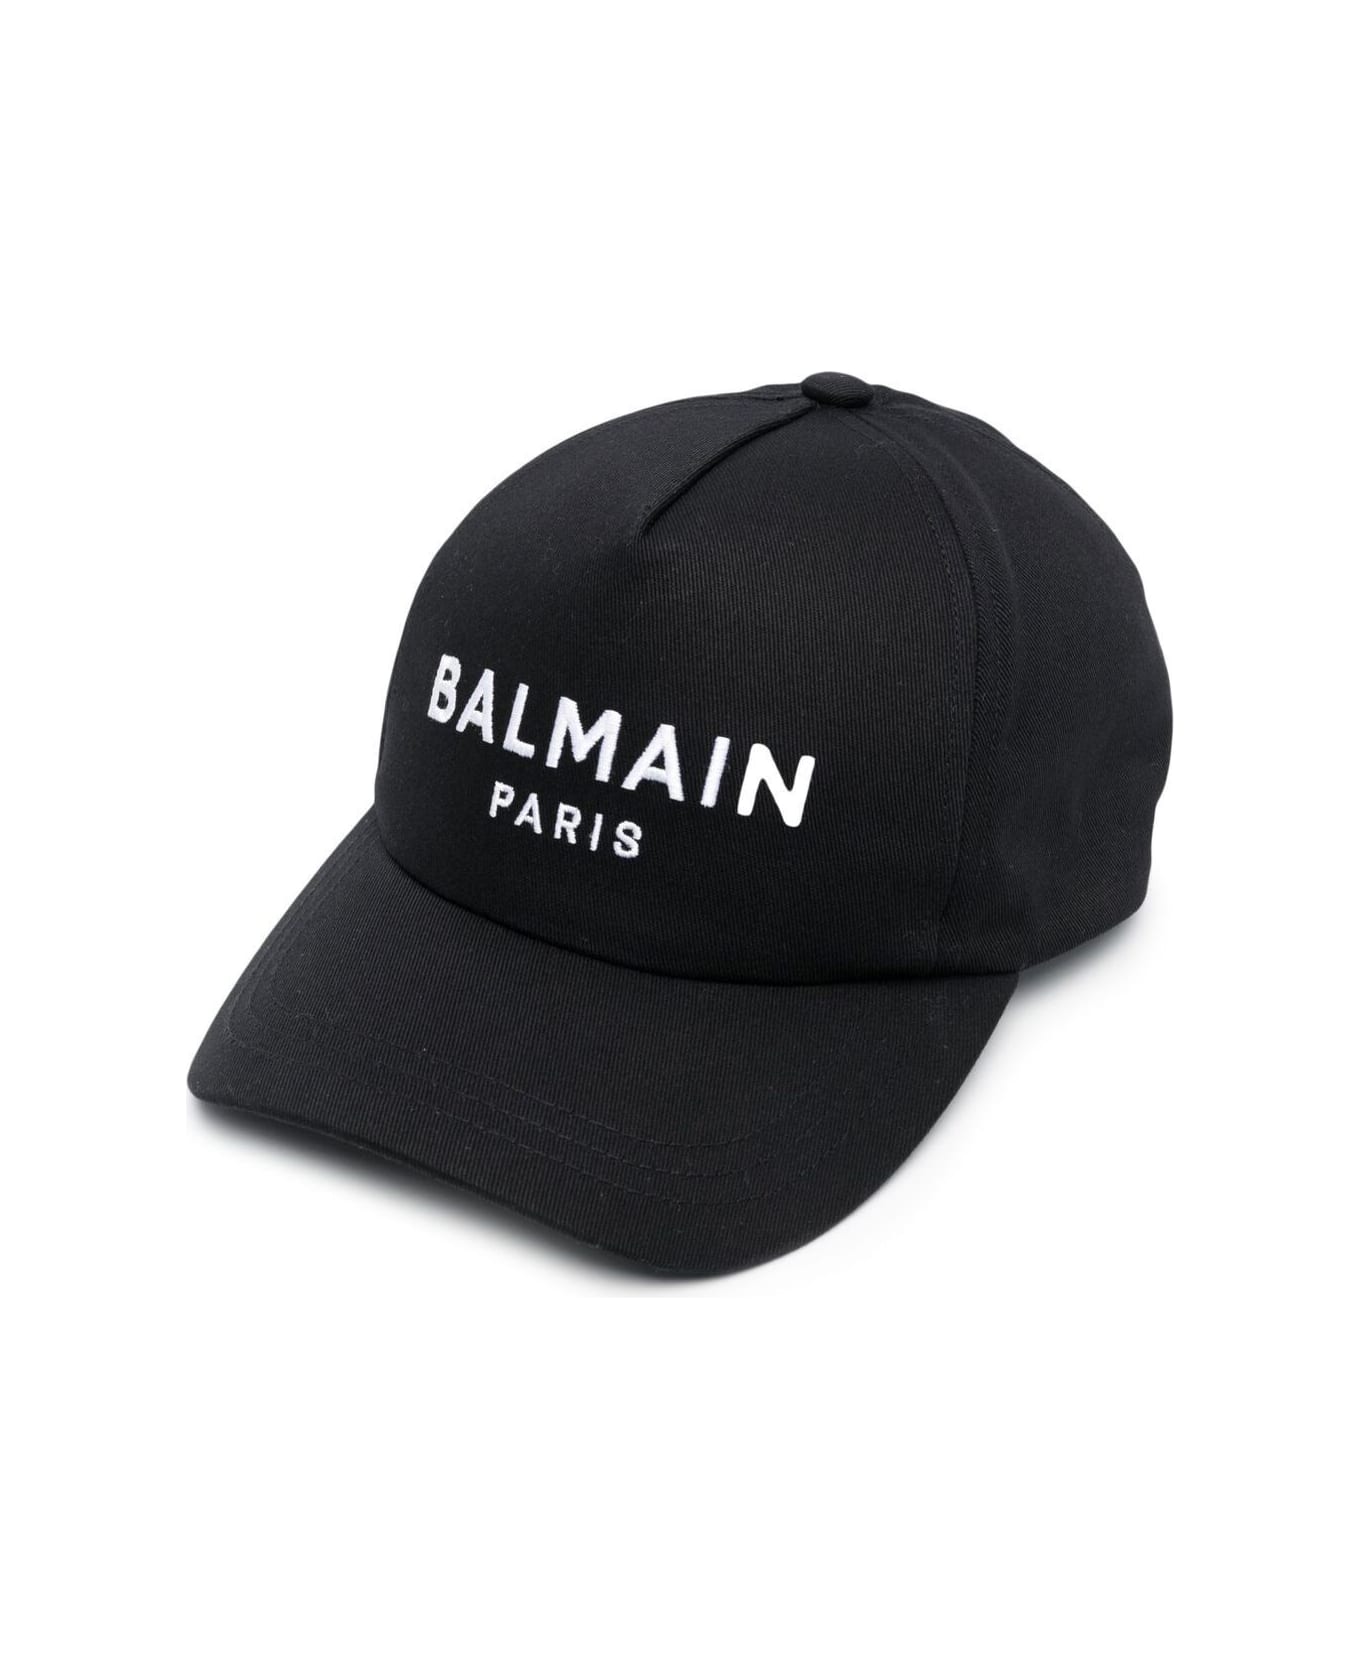 Balmain Print Black Cap With Embroidered Logo On The Front In Cotton - Black